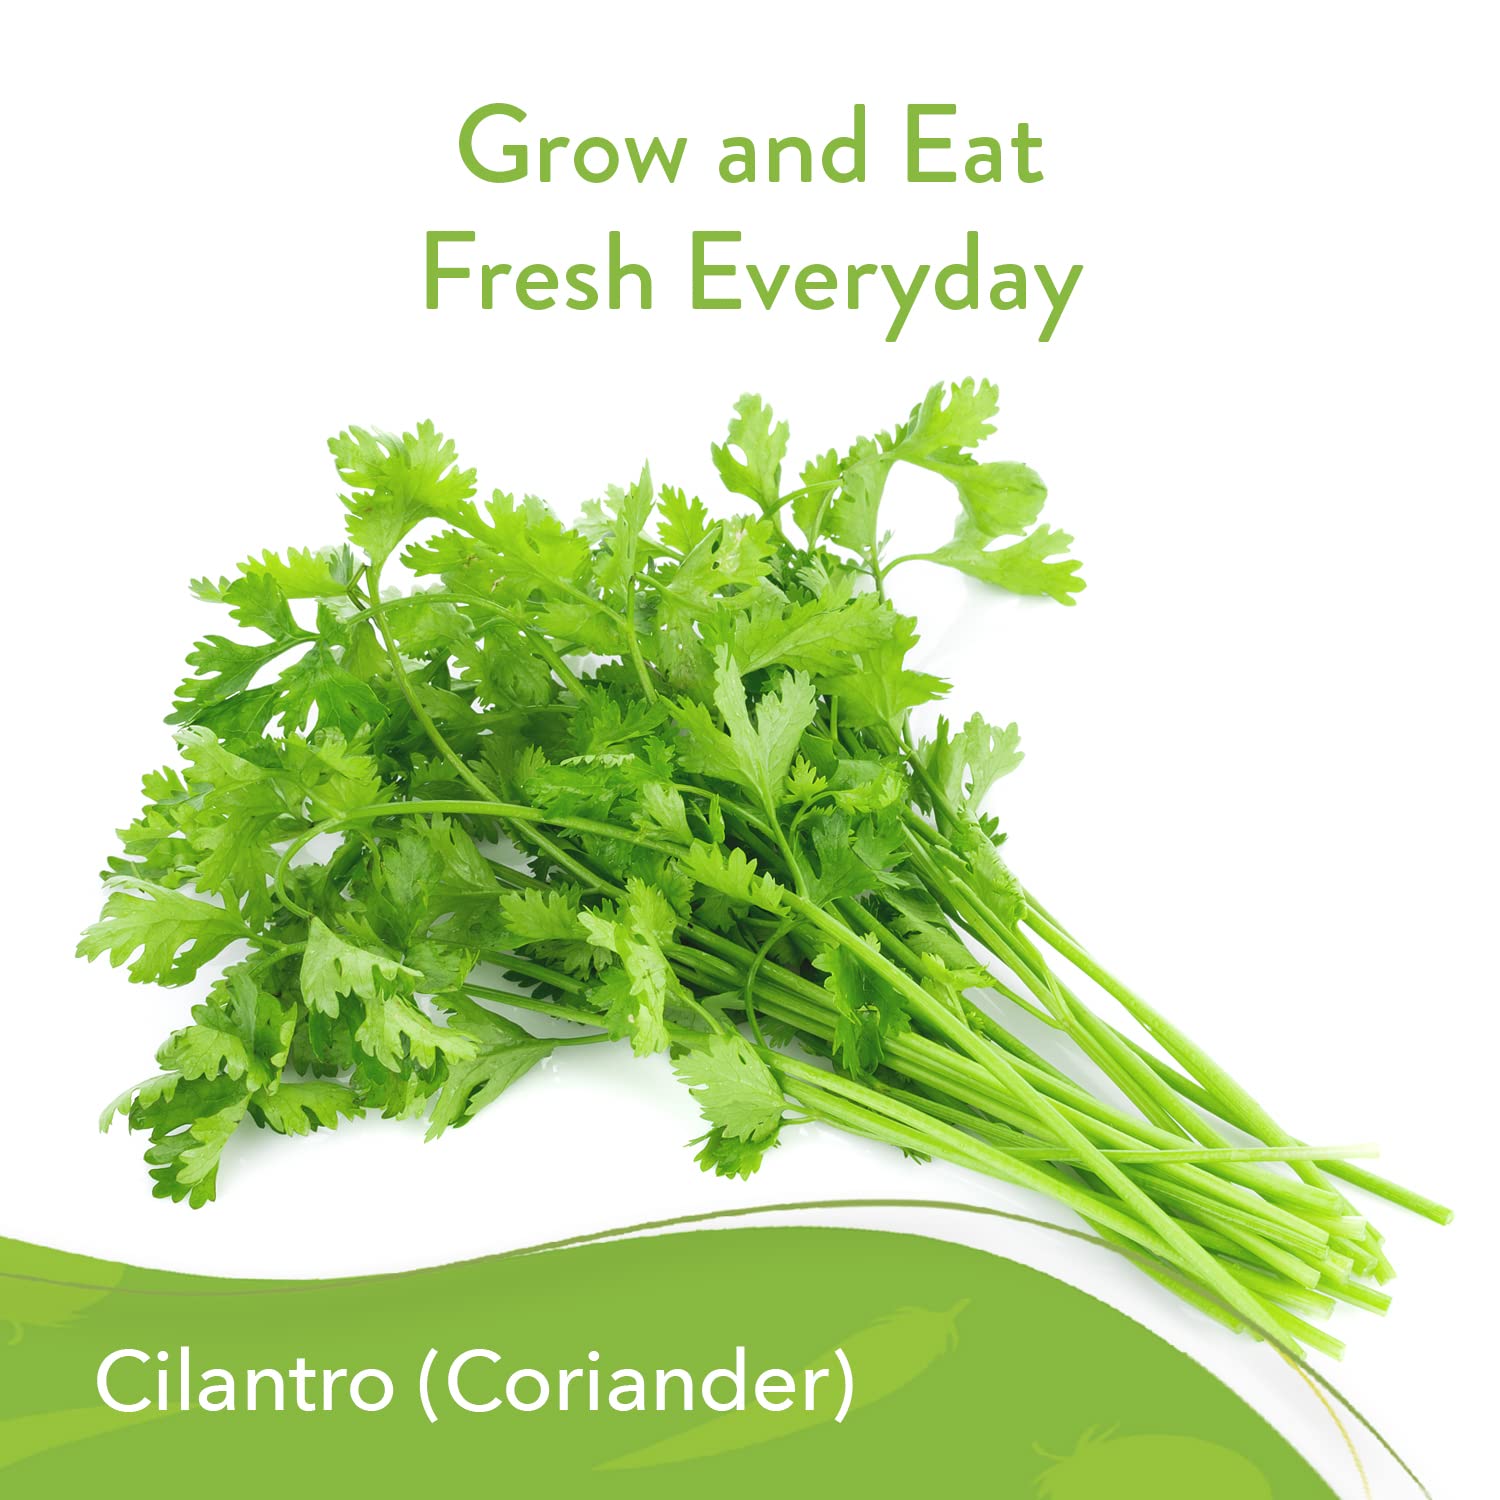 HOME GROWN 500+ Cilantro Seeds for Planting Indoors or Outdoors - Heirloom, Non-GMO Coriander Seeds, Grow Your Own Cilantro Plant - Culinary Herb Seeds for Your Herb Garden